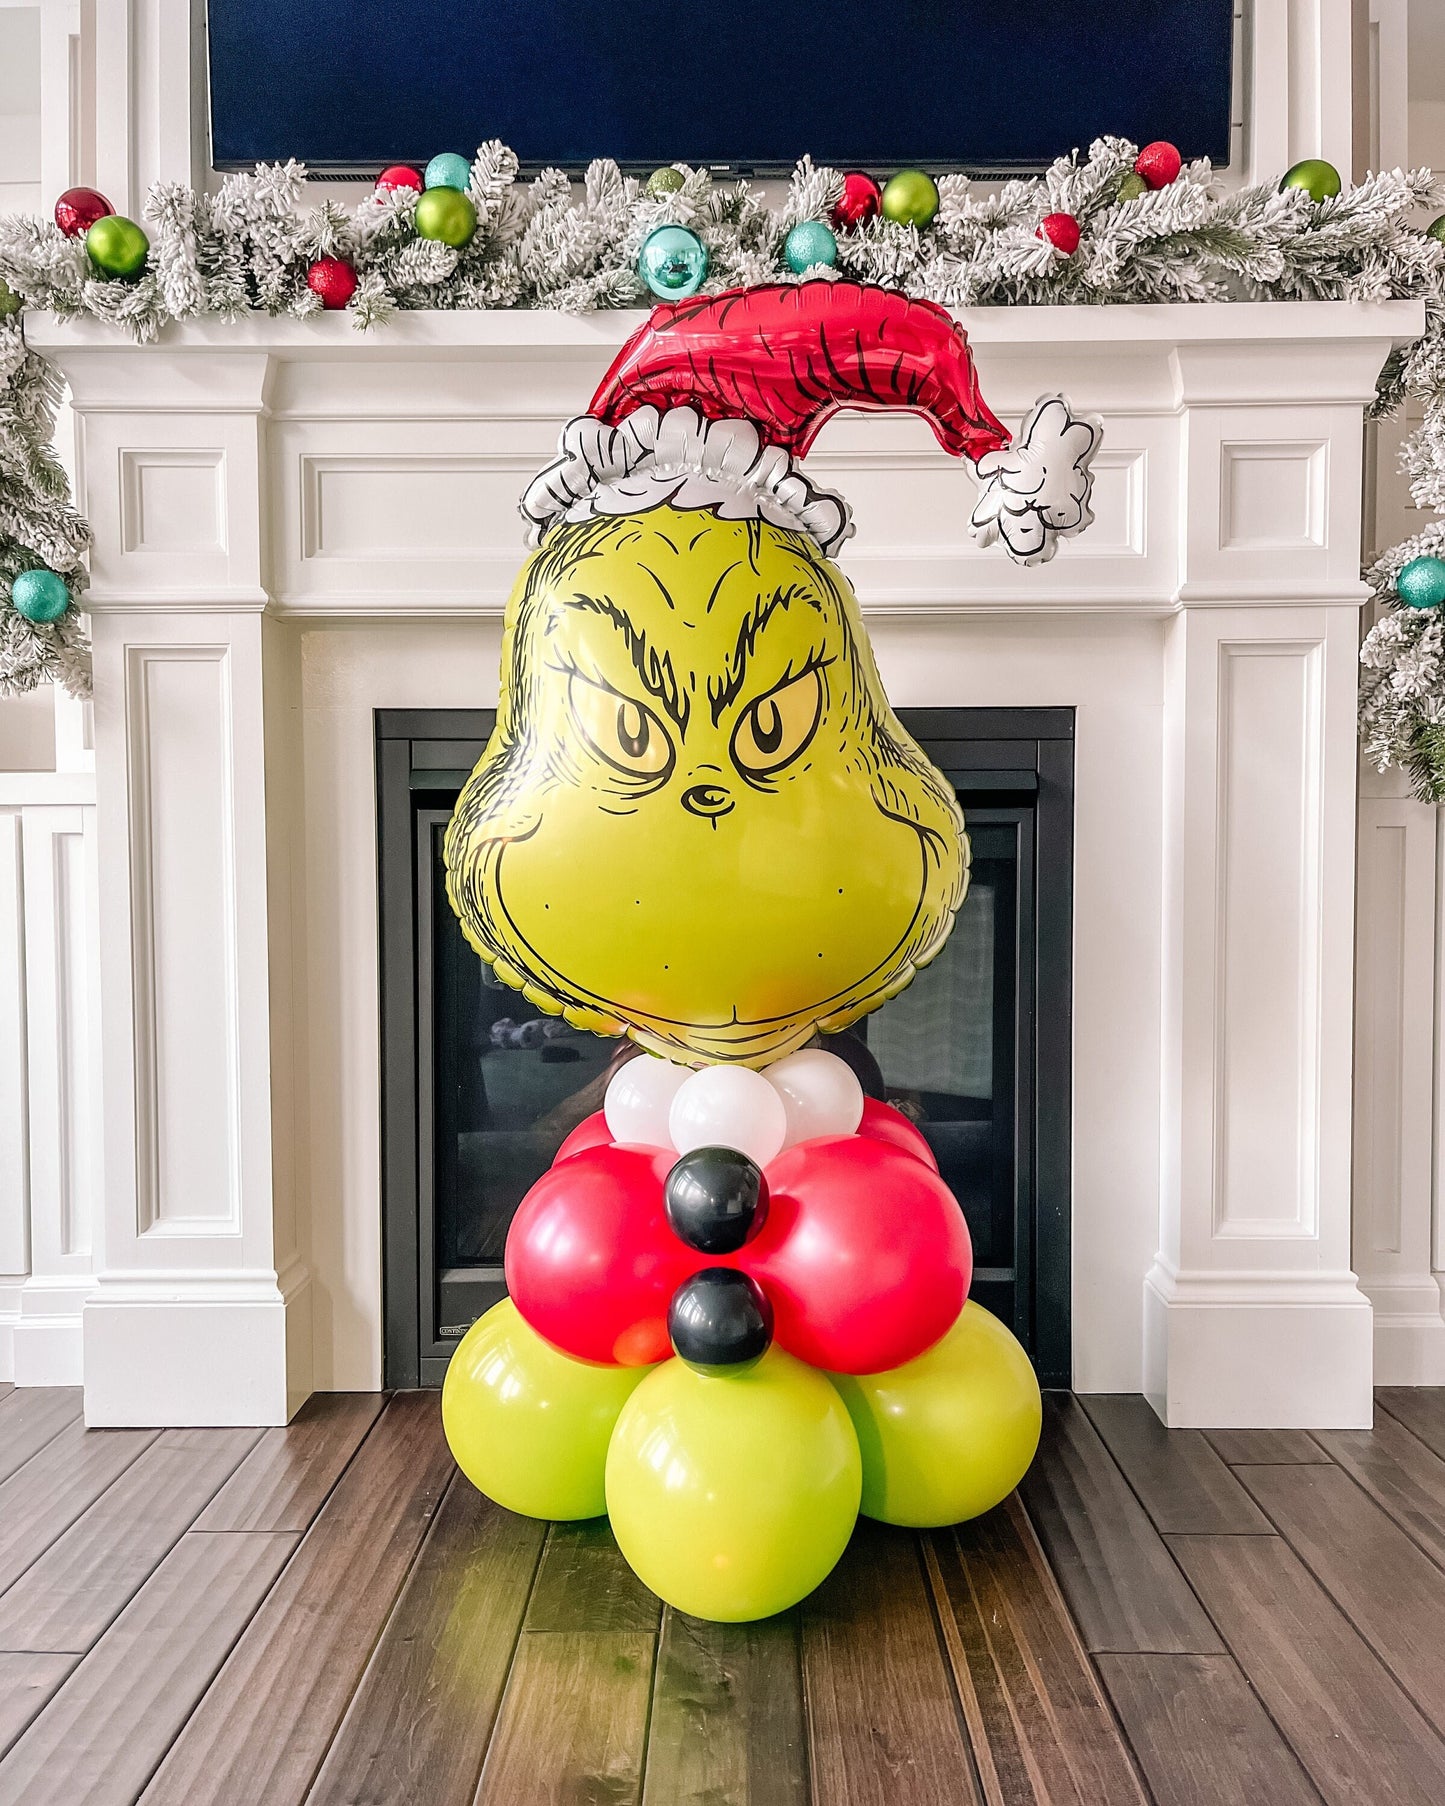 The Grinch Balloon Stack || The Grinch Birthday Party Decor || Christmas Balloons || Kid's Christmas Party Decor